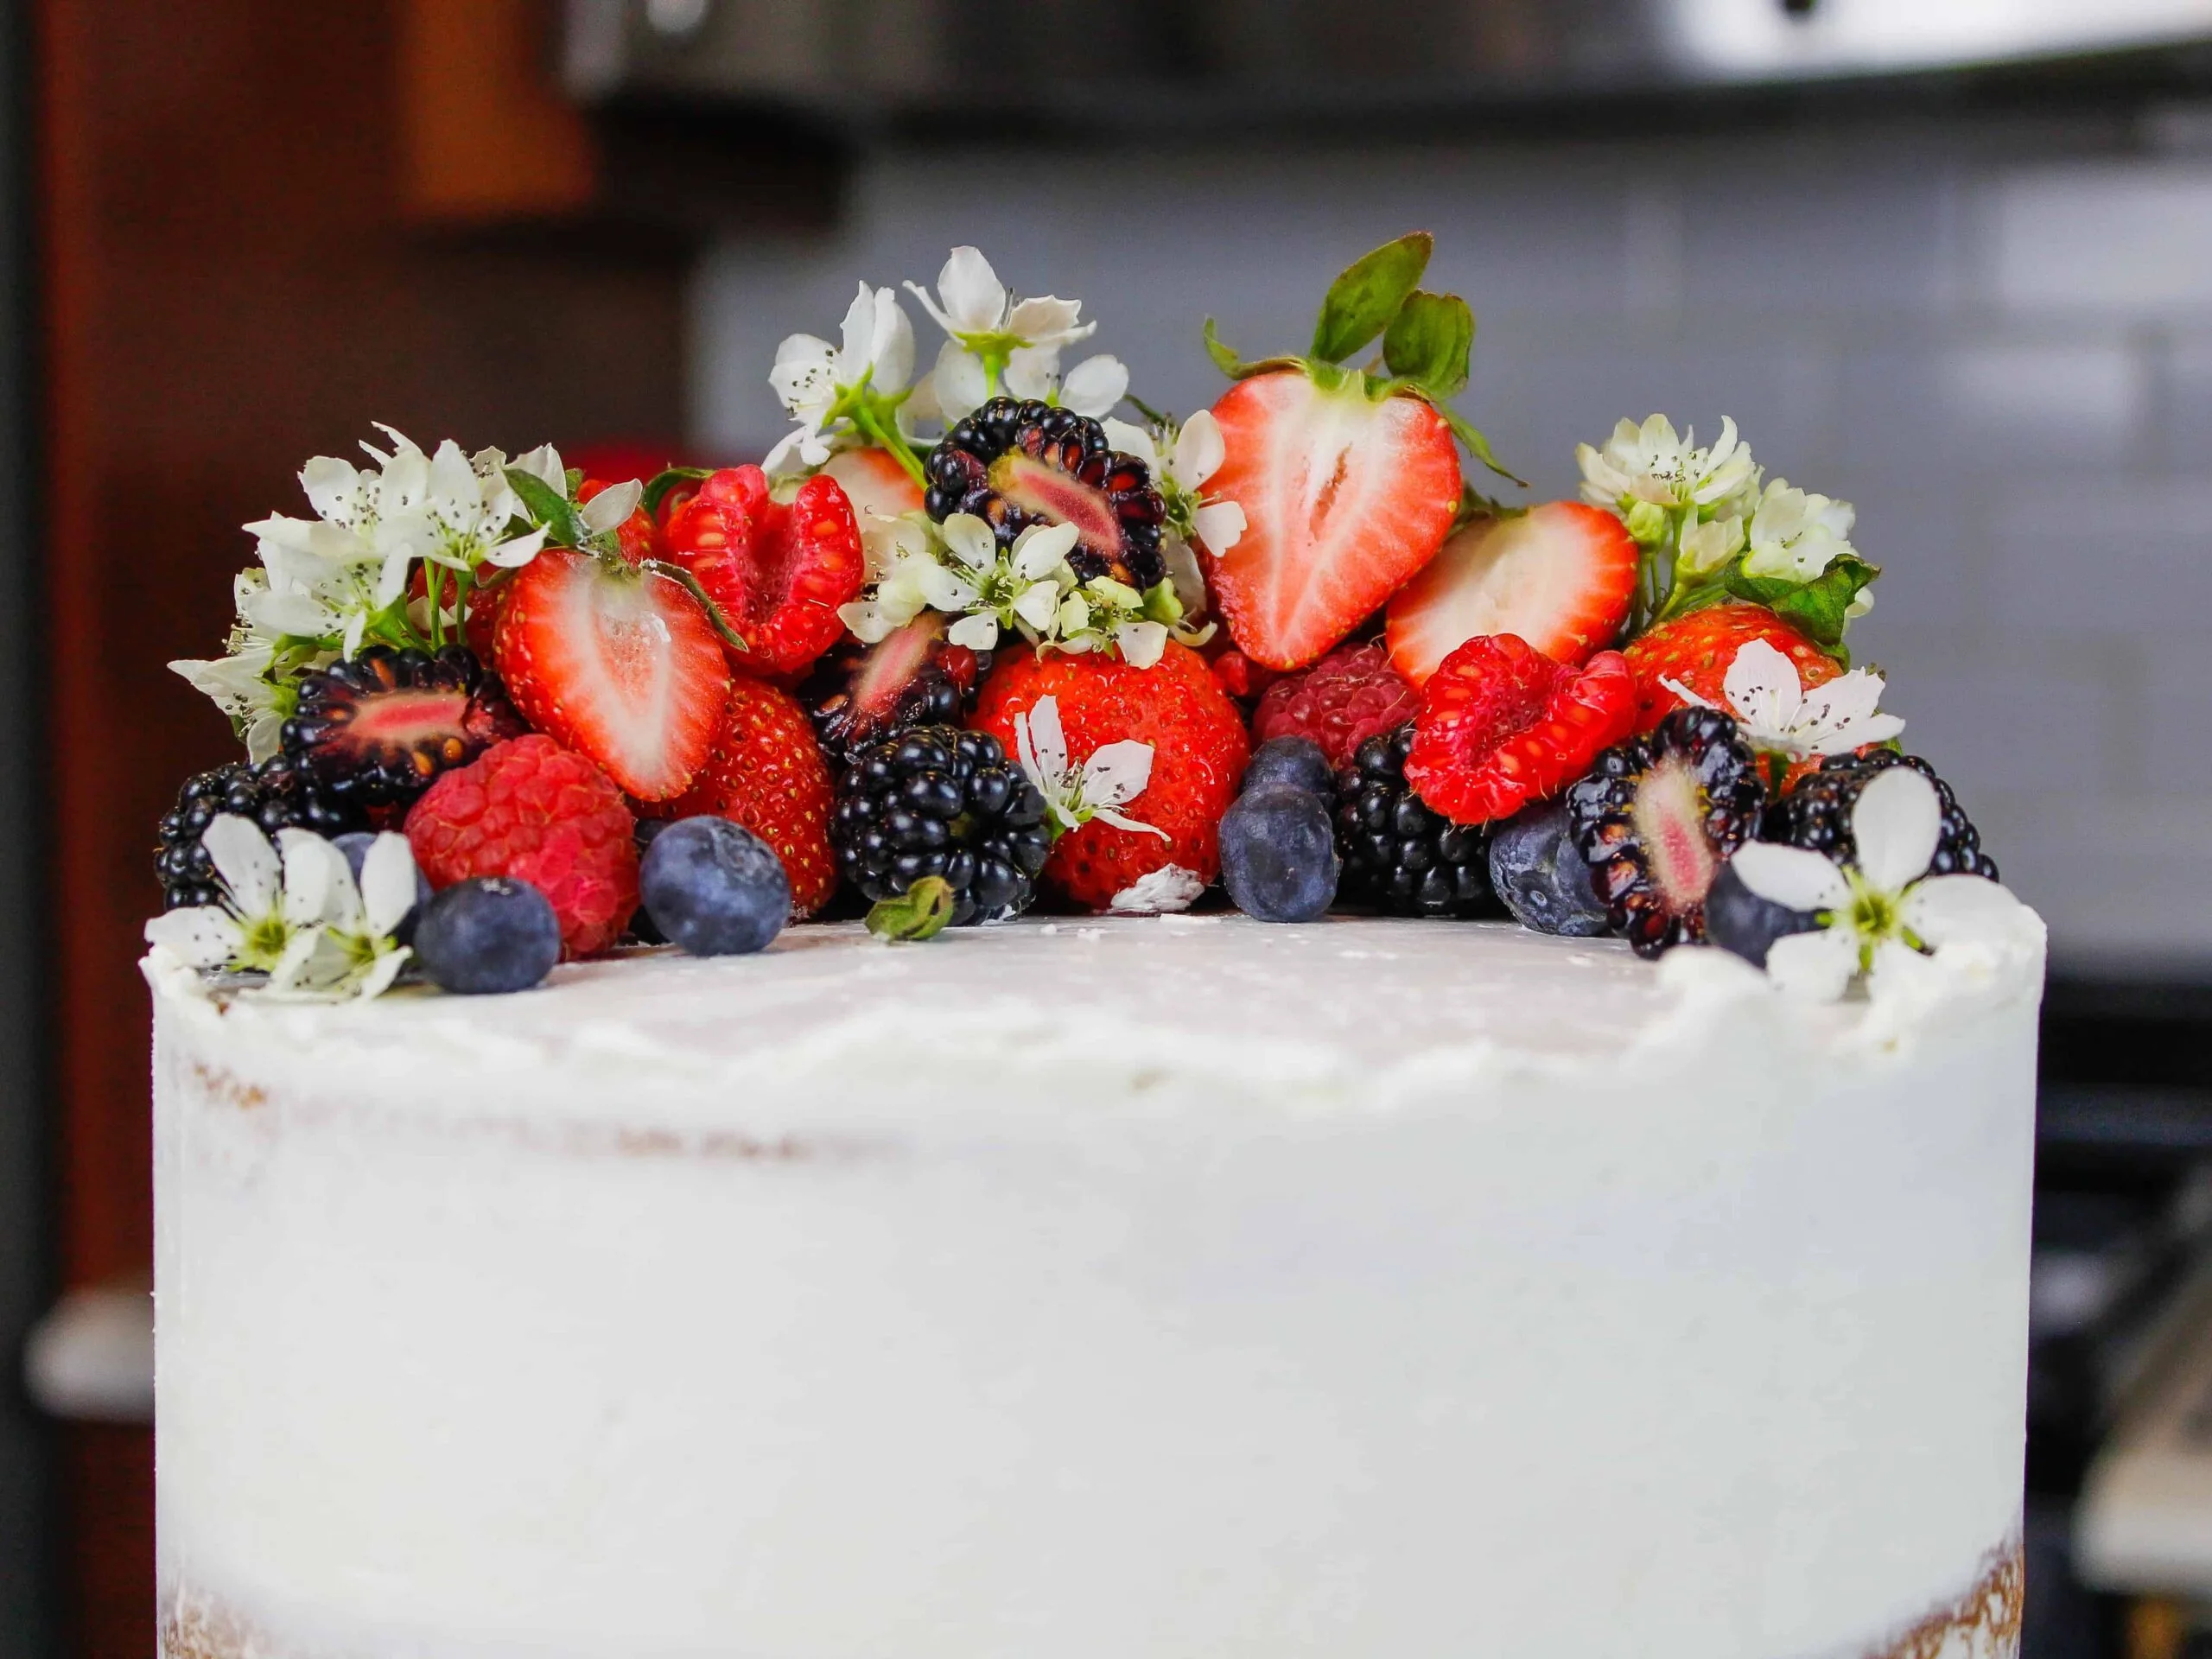 image of top of a cake decorated with fresh berries and edible flowers for spring and easter